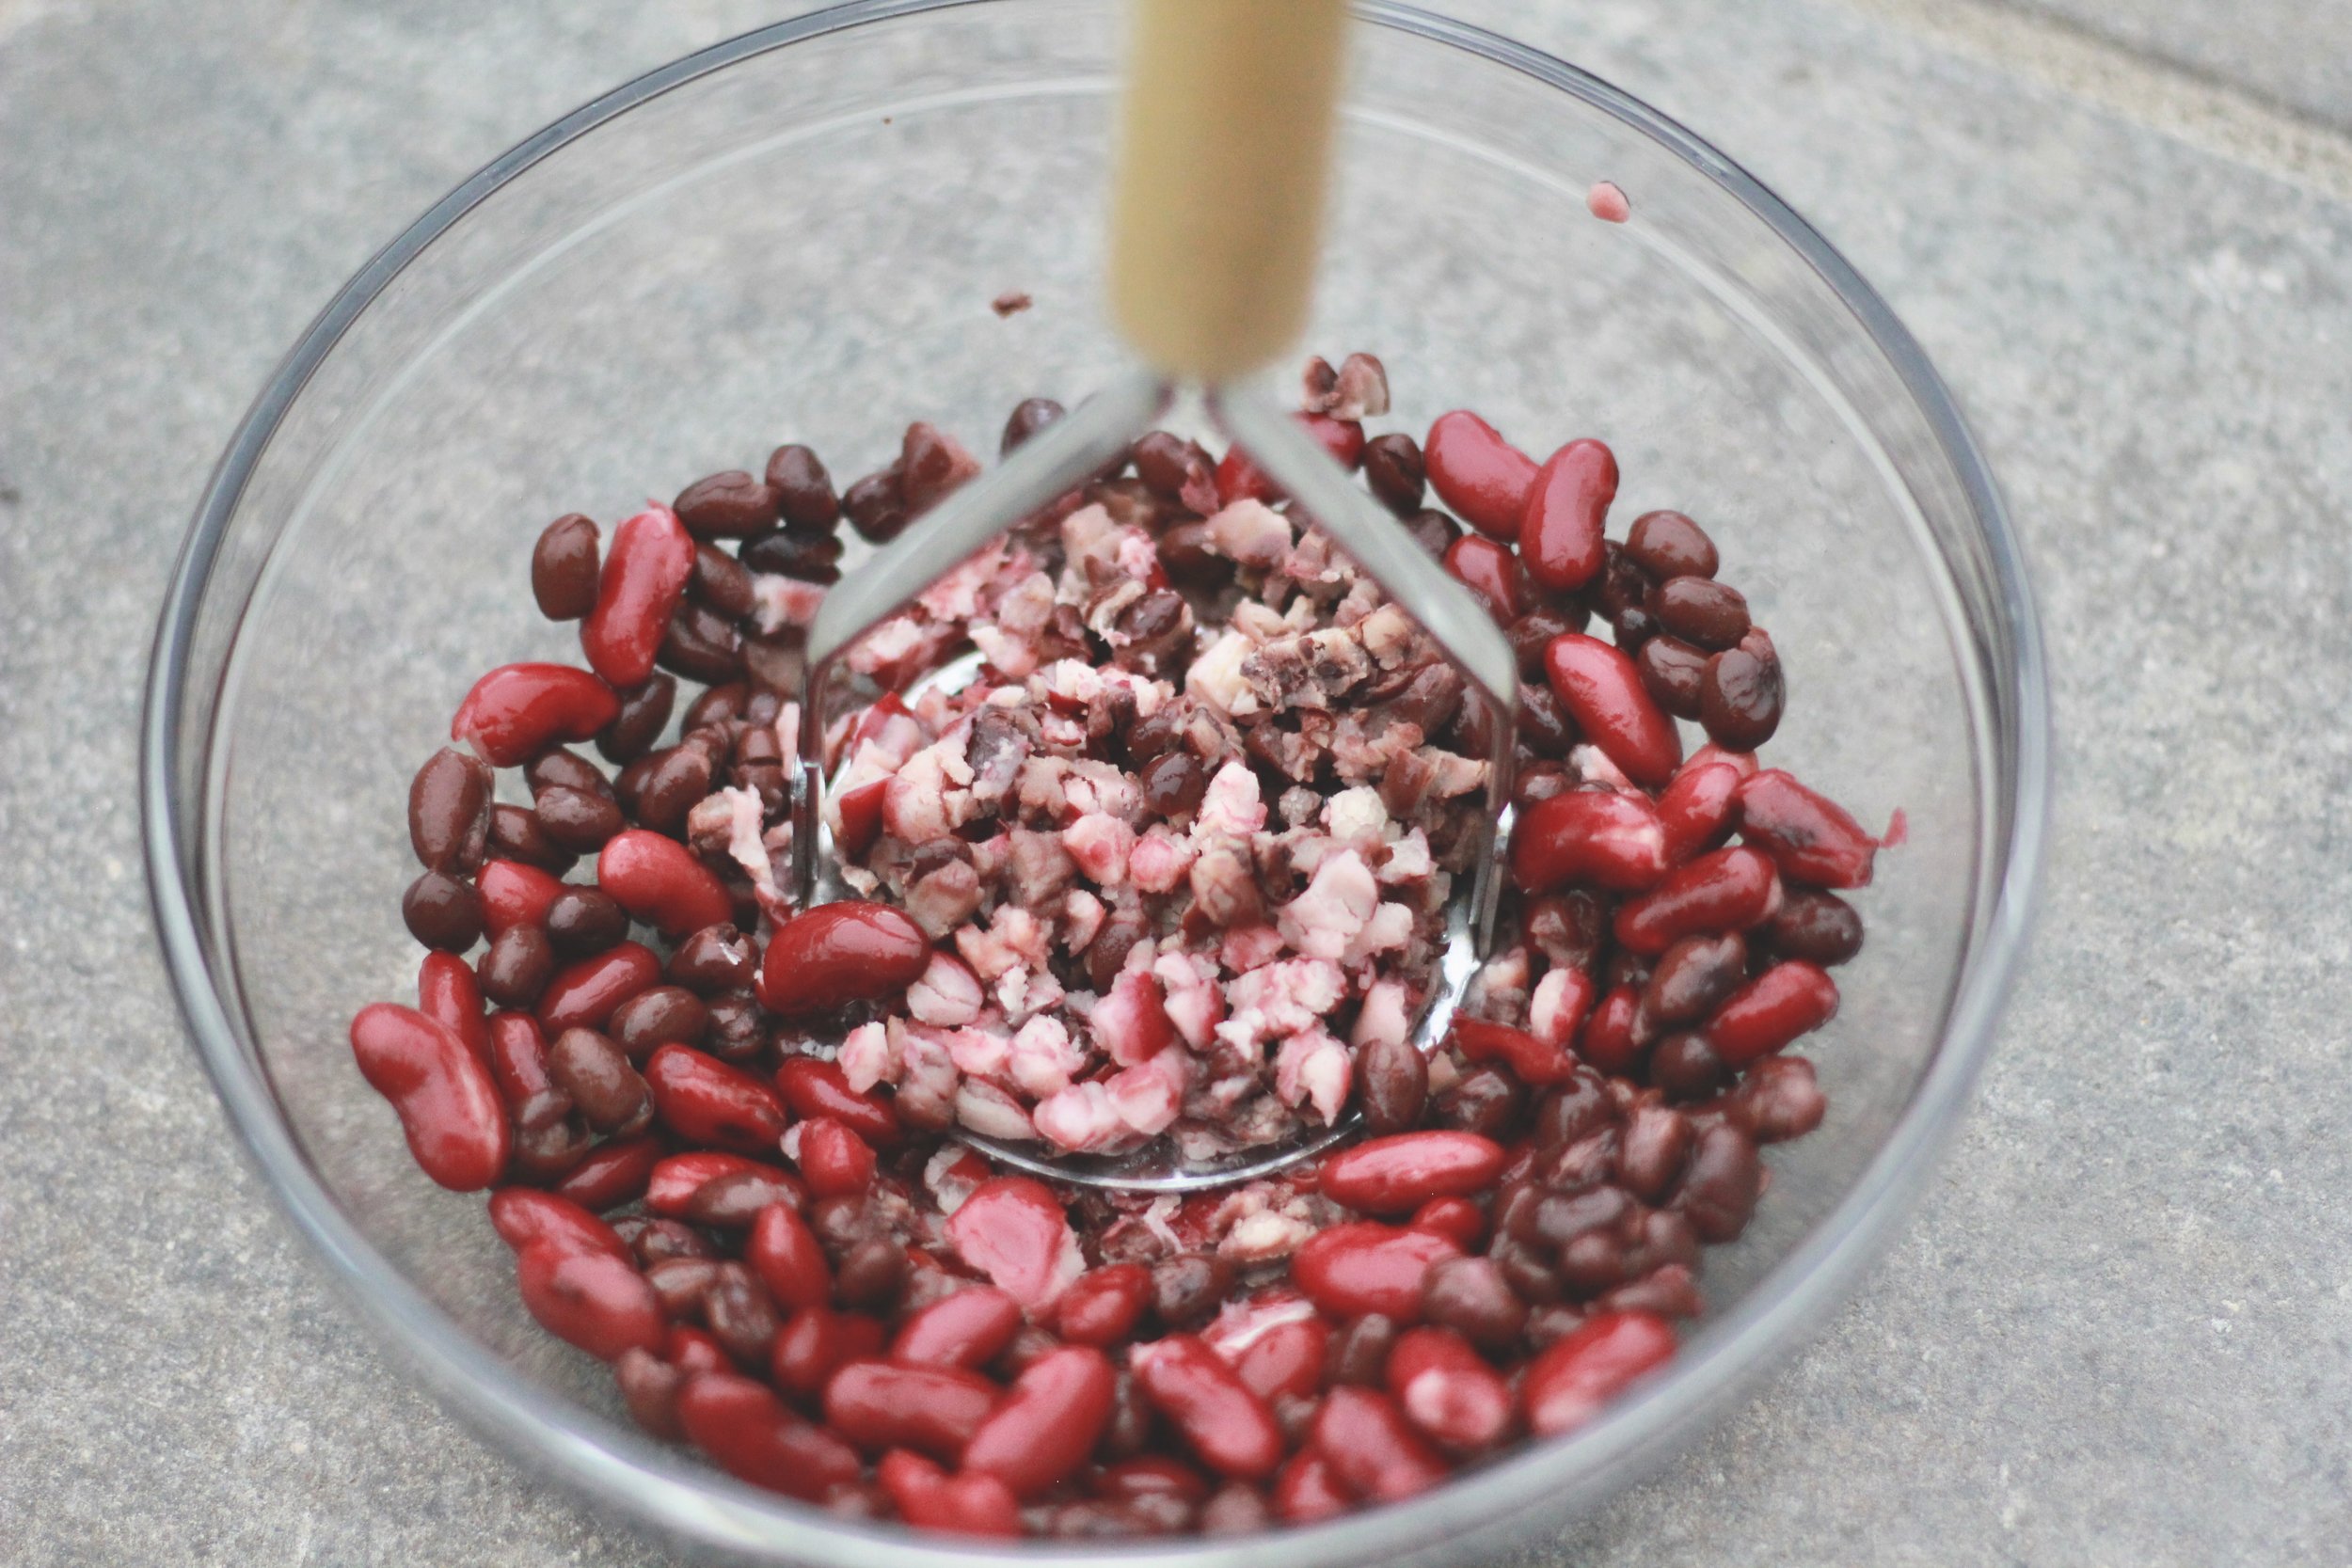 Mash the beans to thicken the chili. it adds an amazing texture!